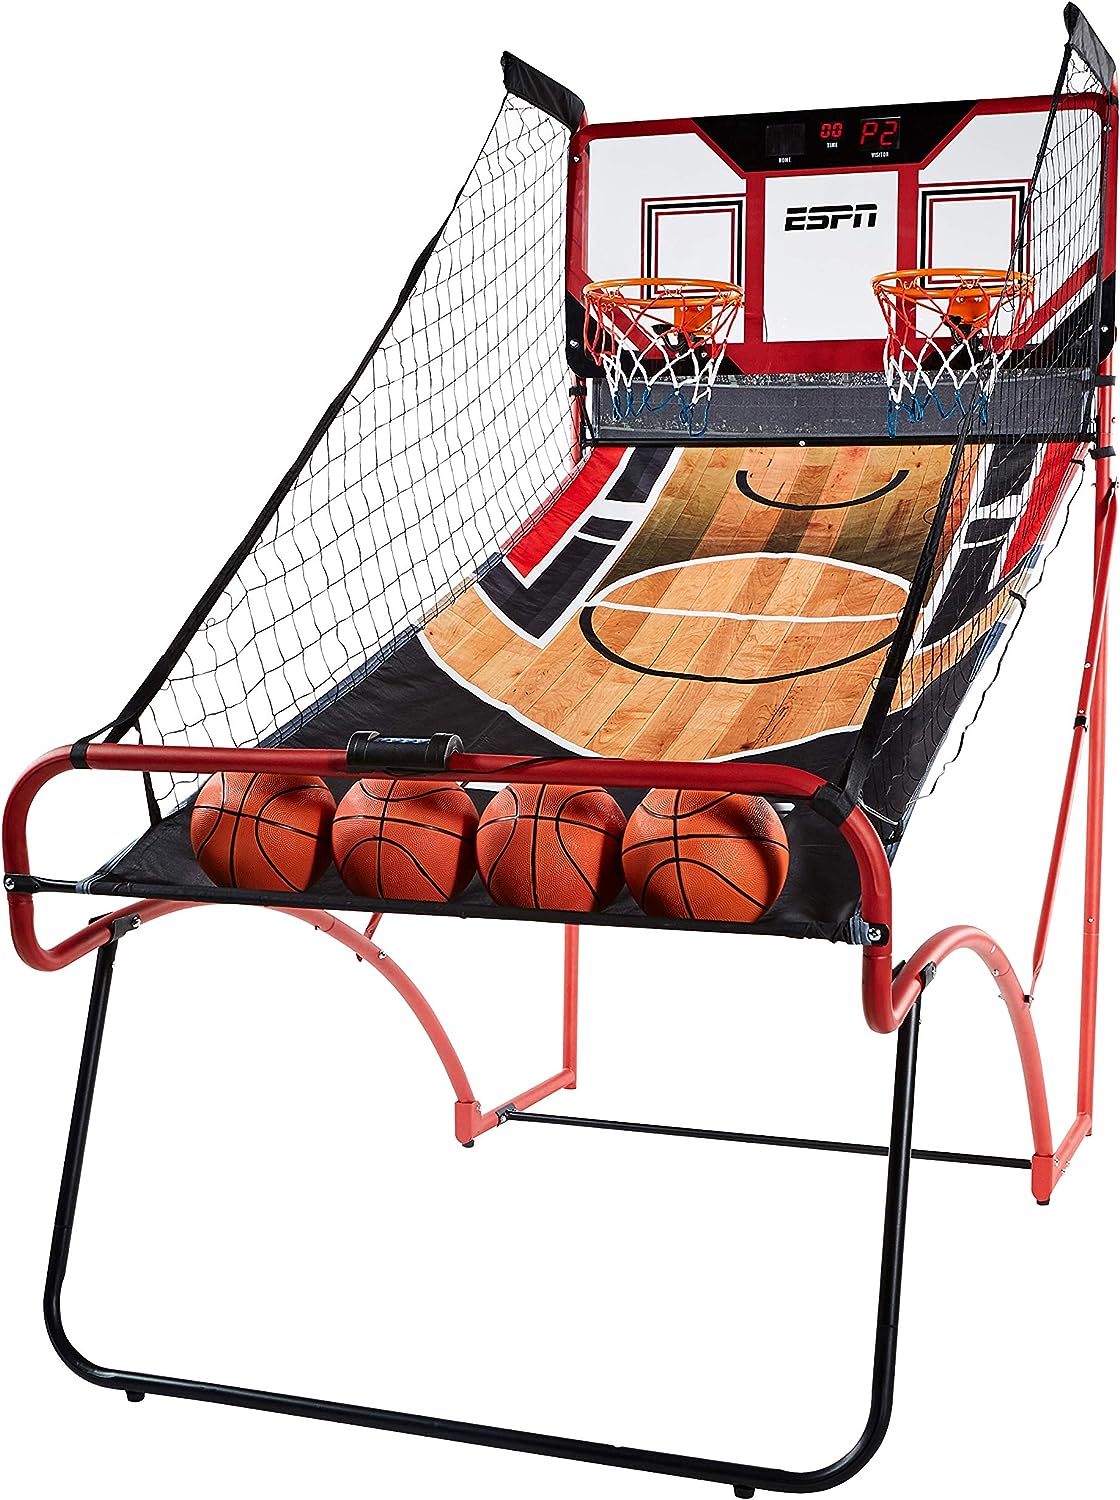 Best Basketball Arcade Game For Your Friendly Competition With Friends